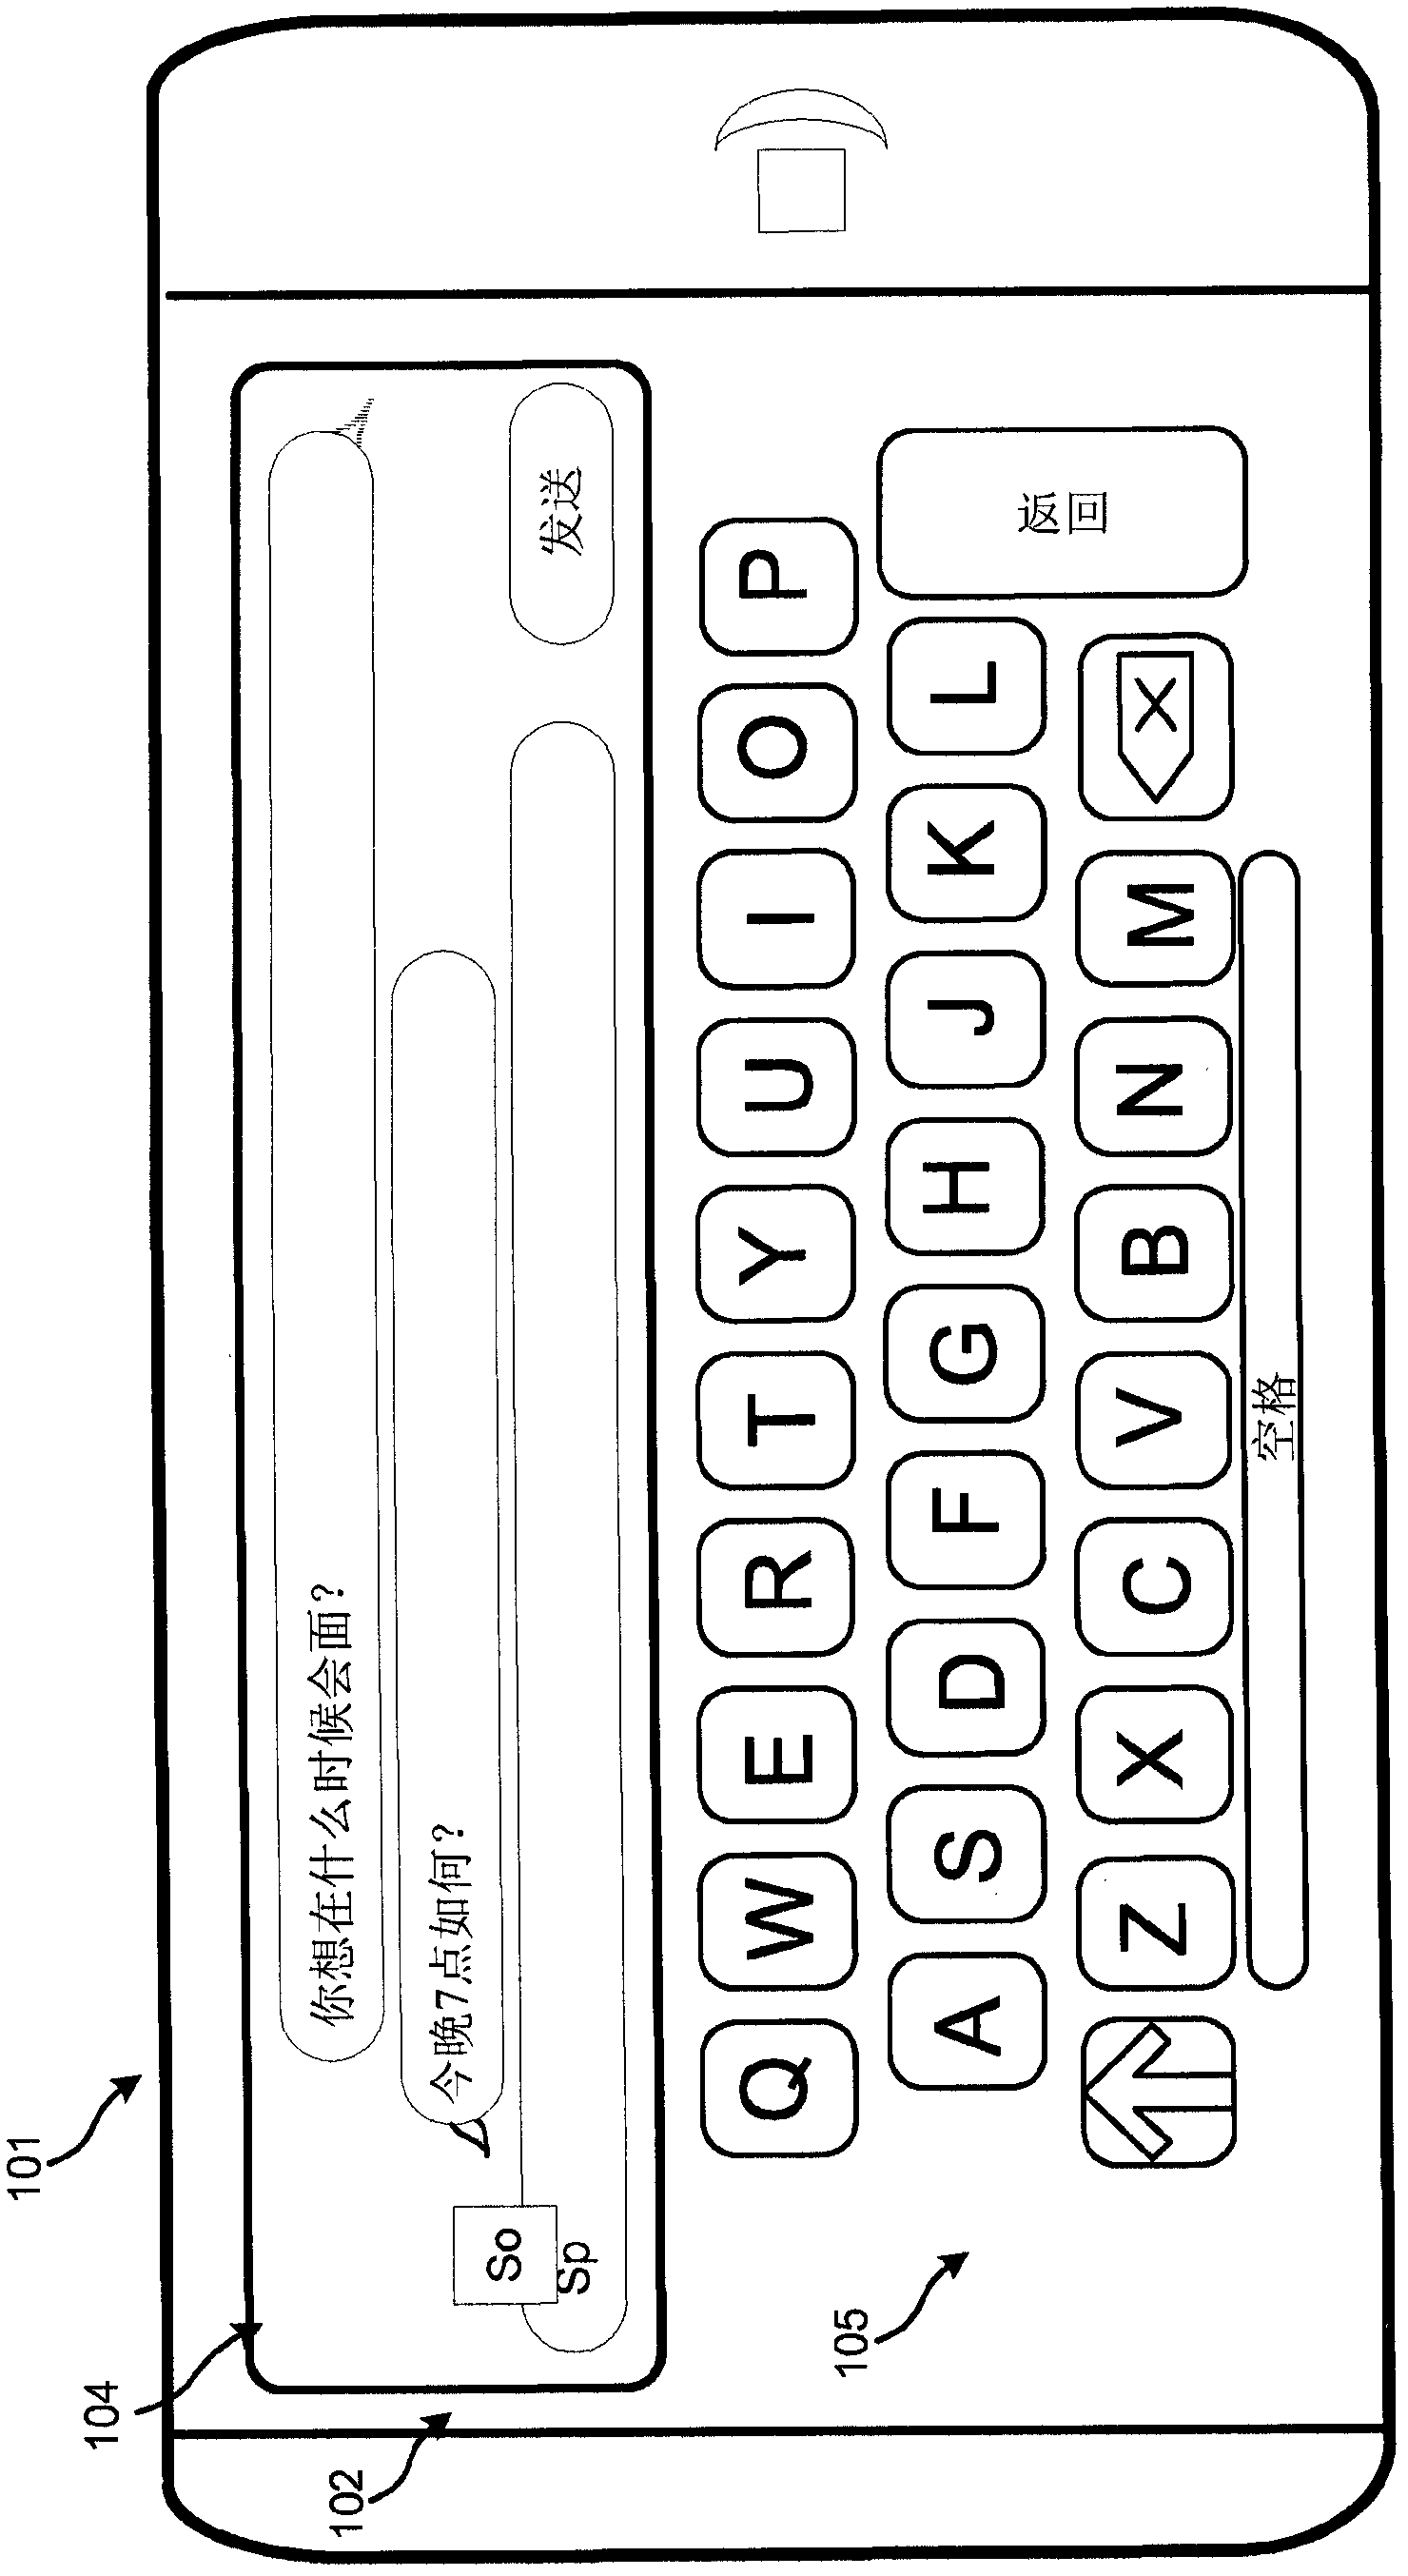 Pressure sensitive user interface for mobile devices